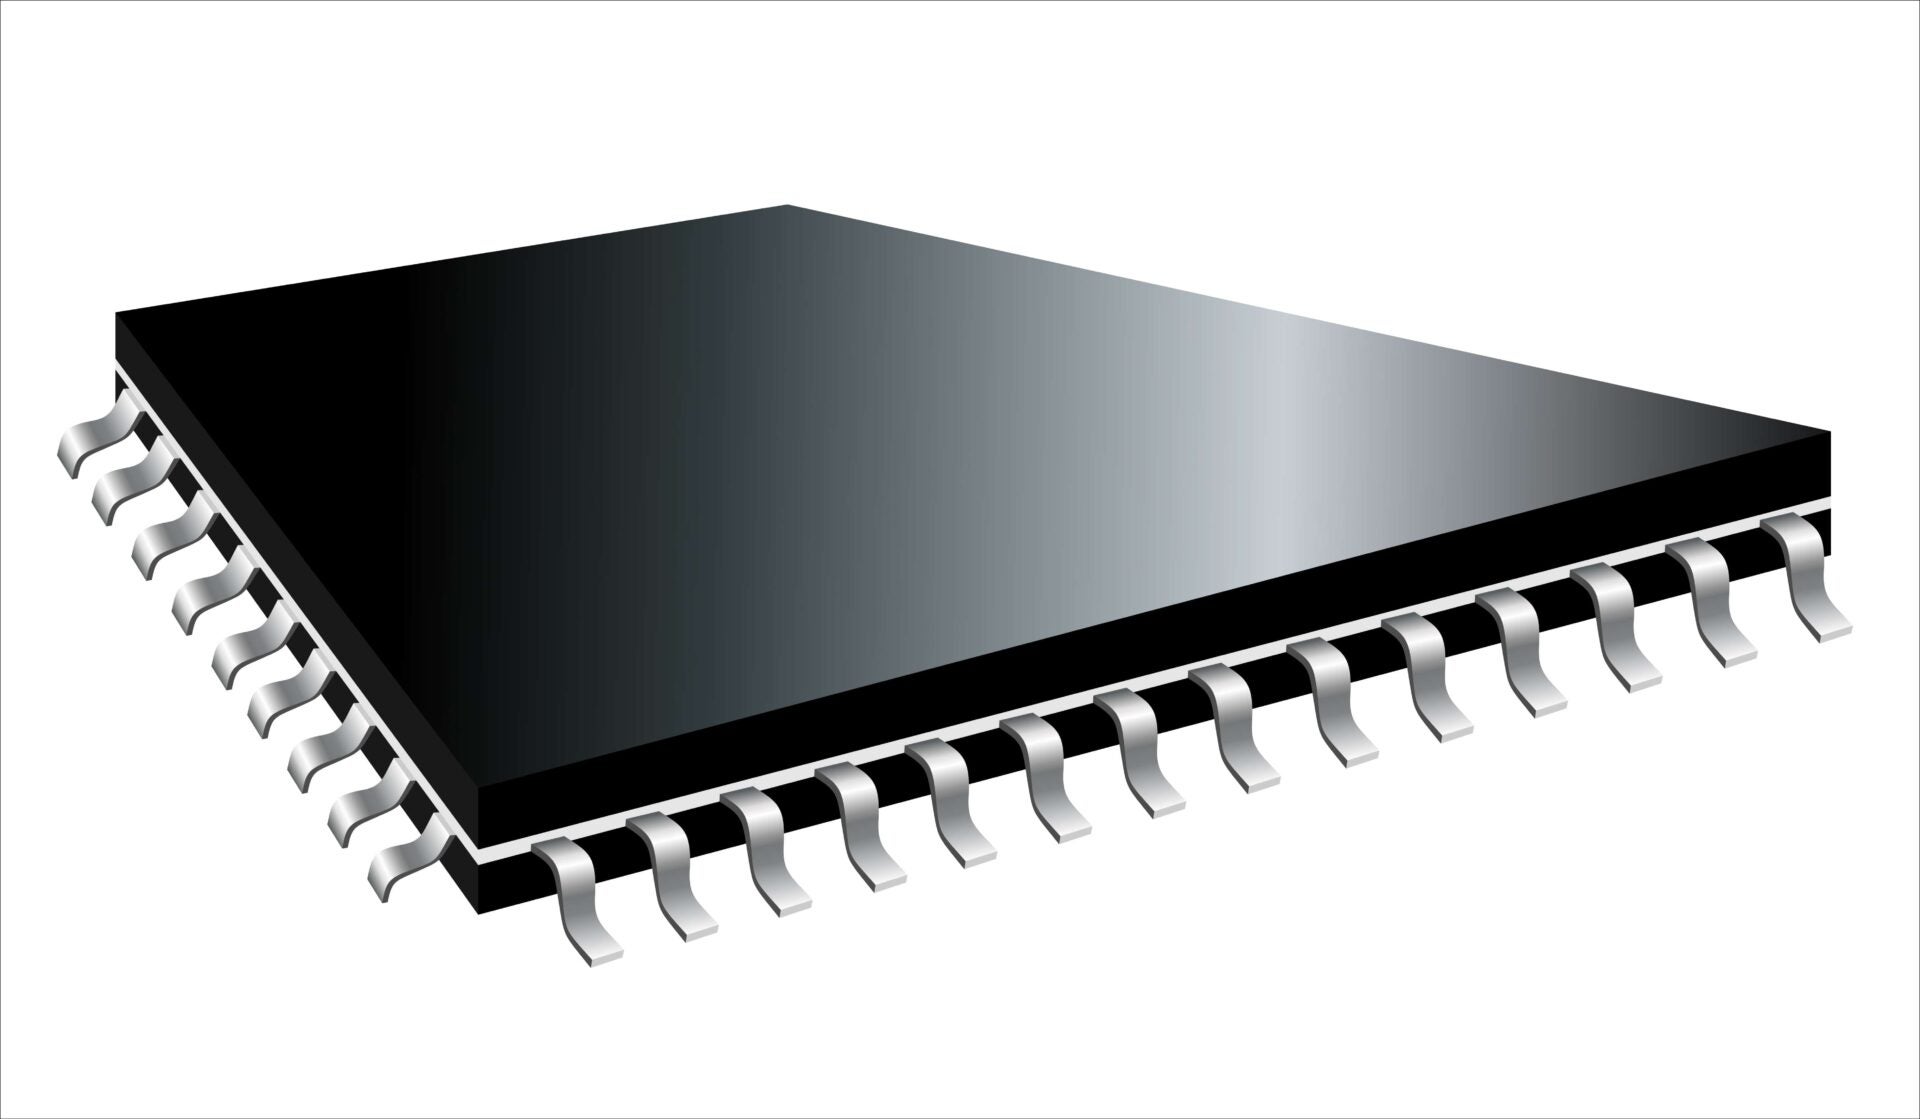 Representation of an integrated circuit package type